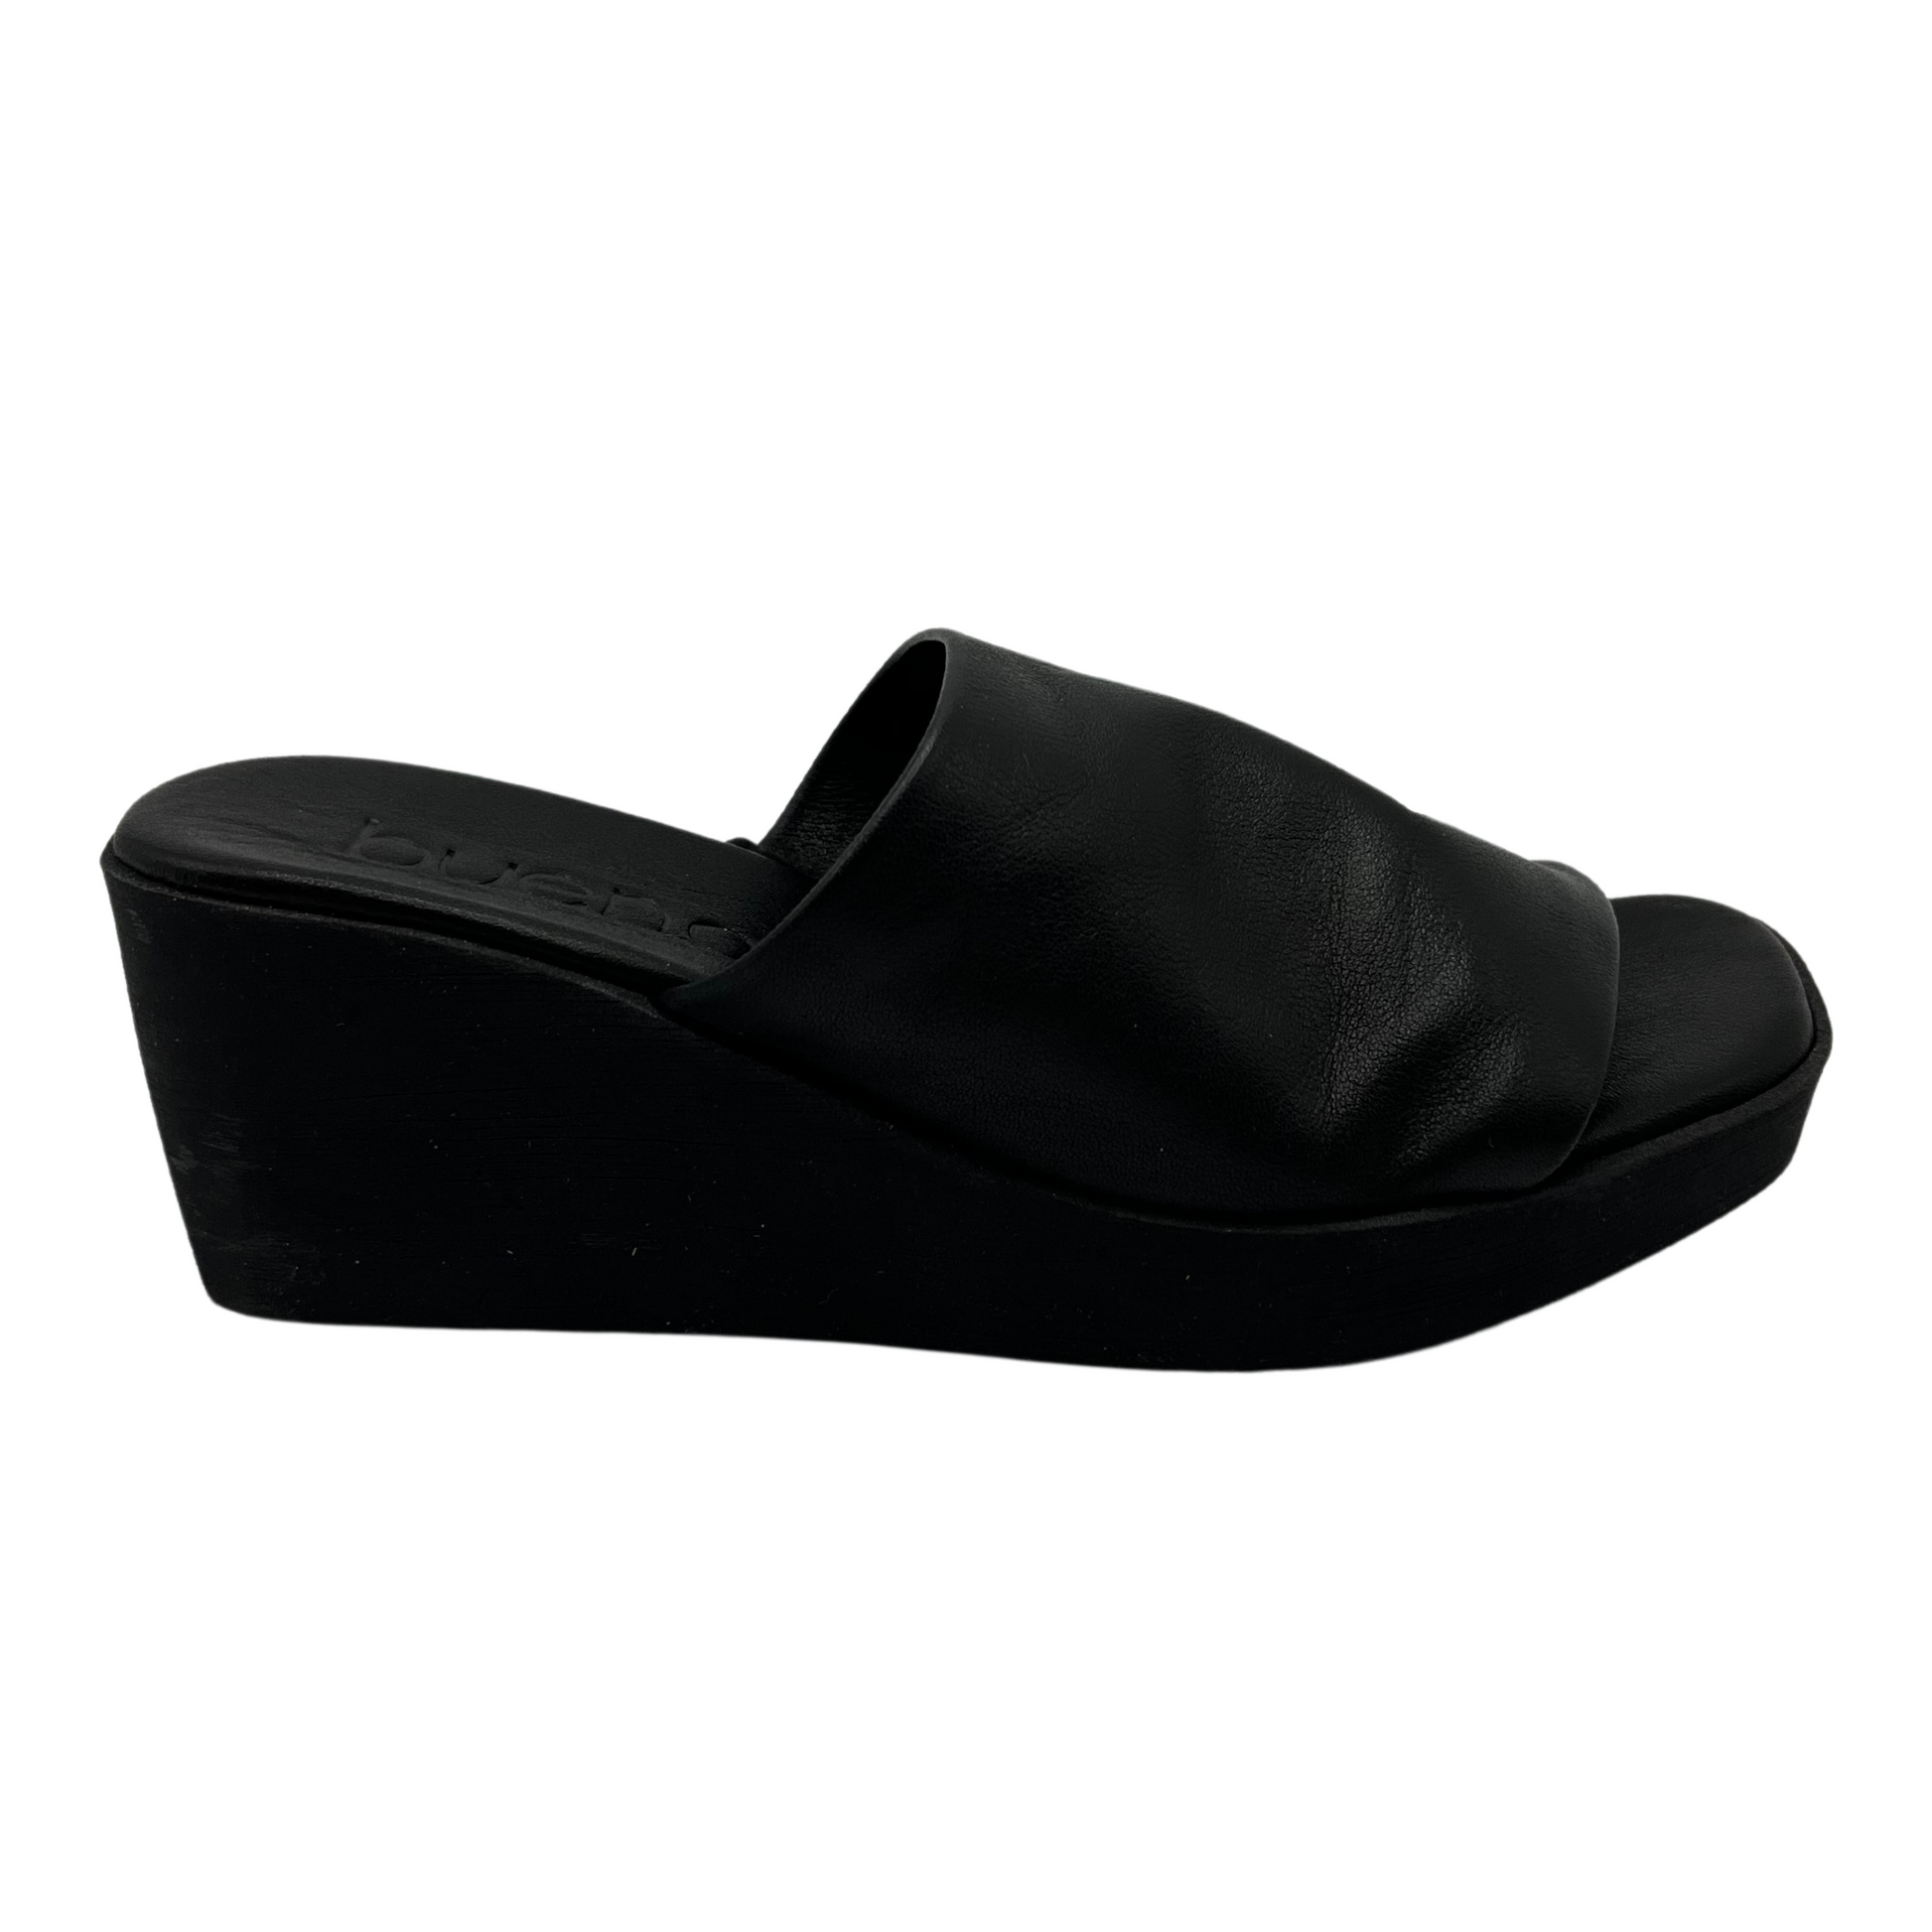 Right facing view of black leather wedge sandal with square toe and black outsole